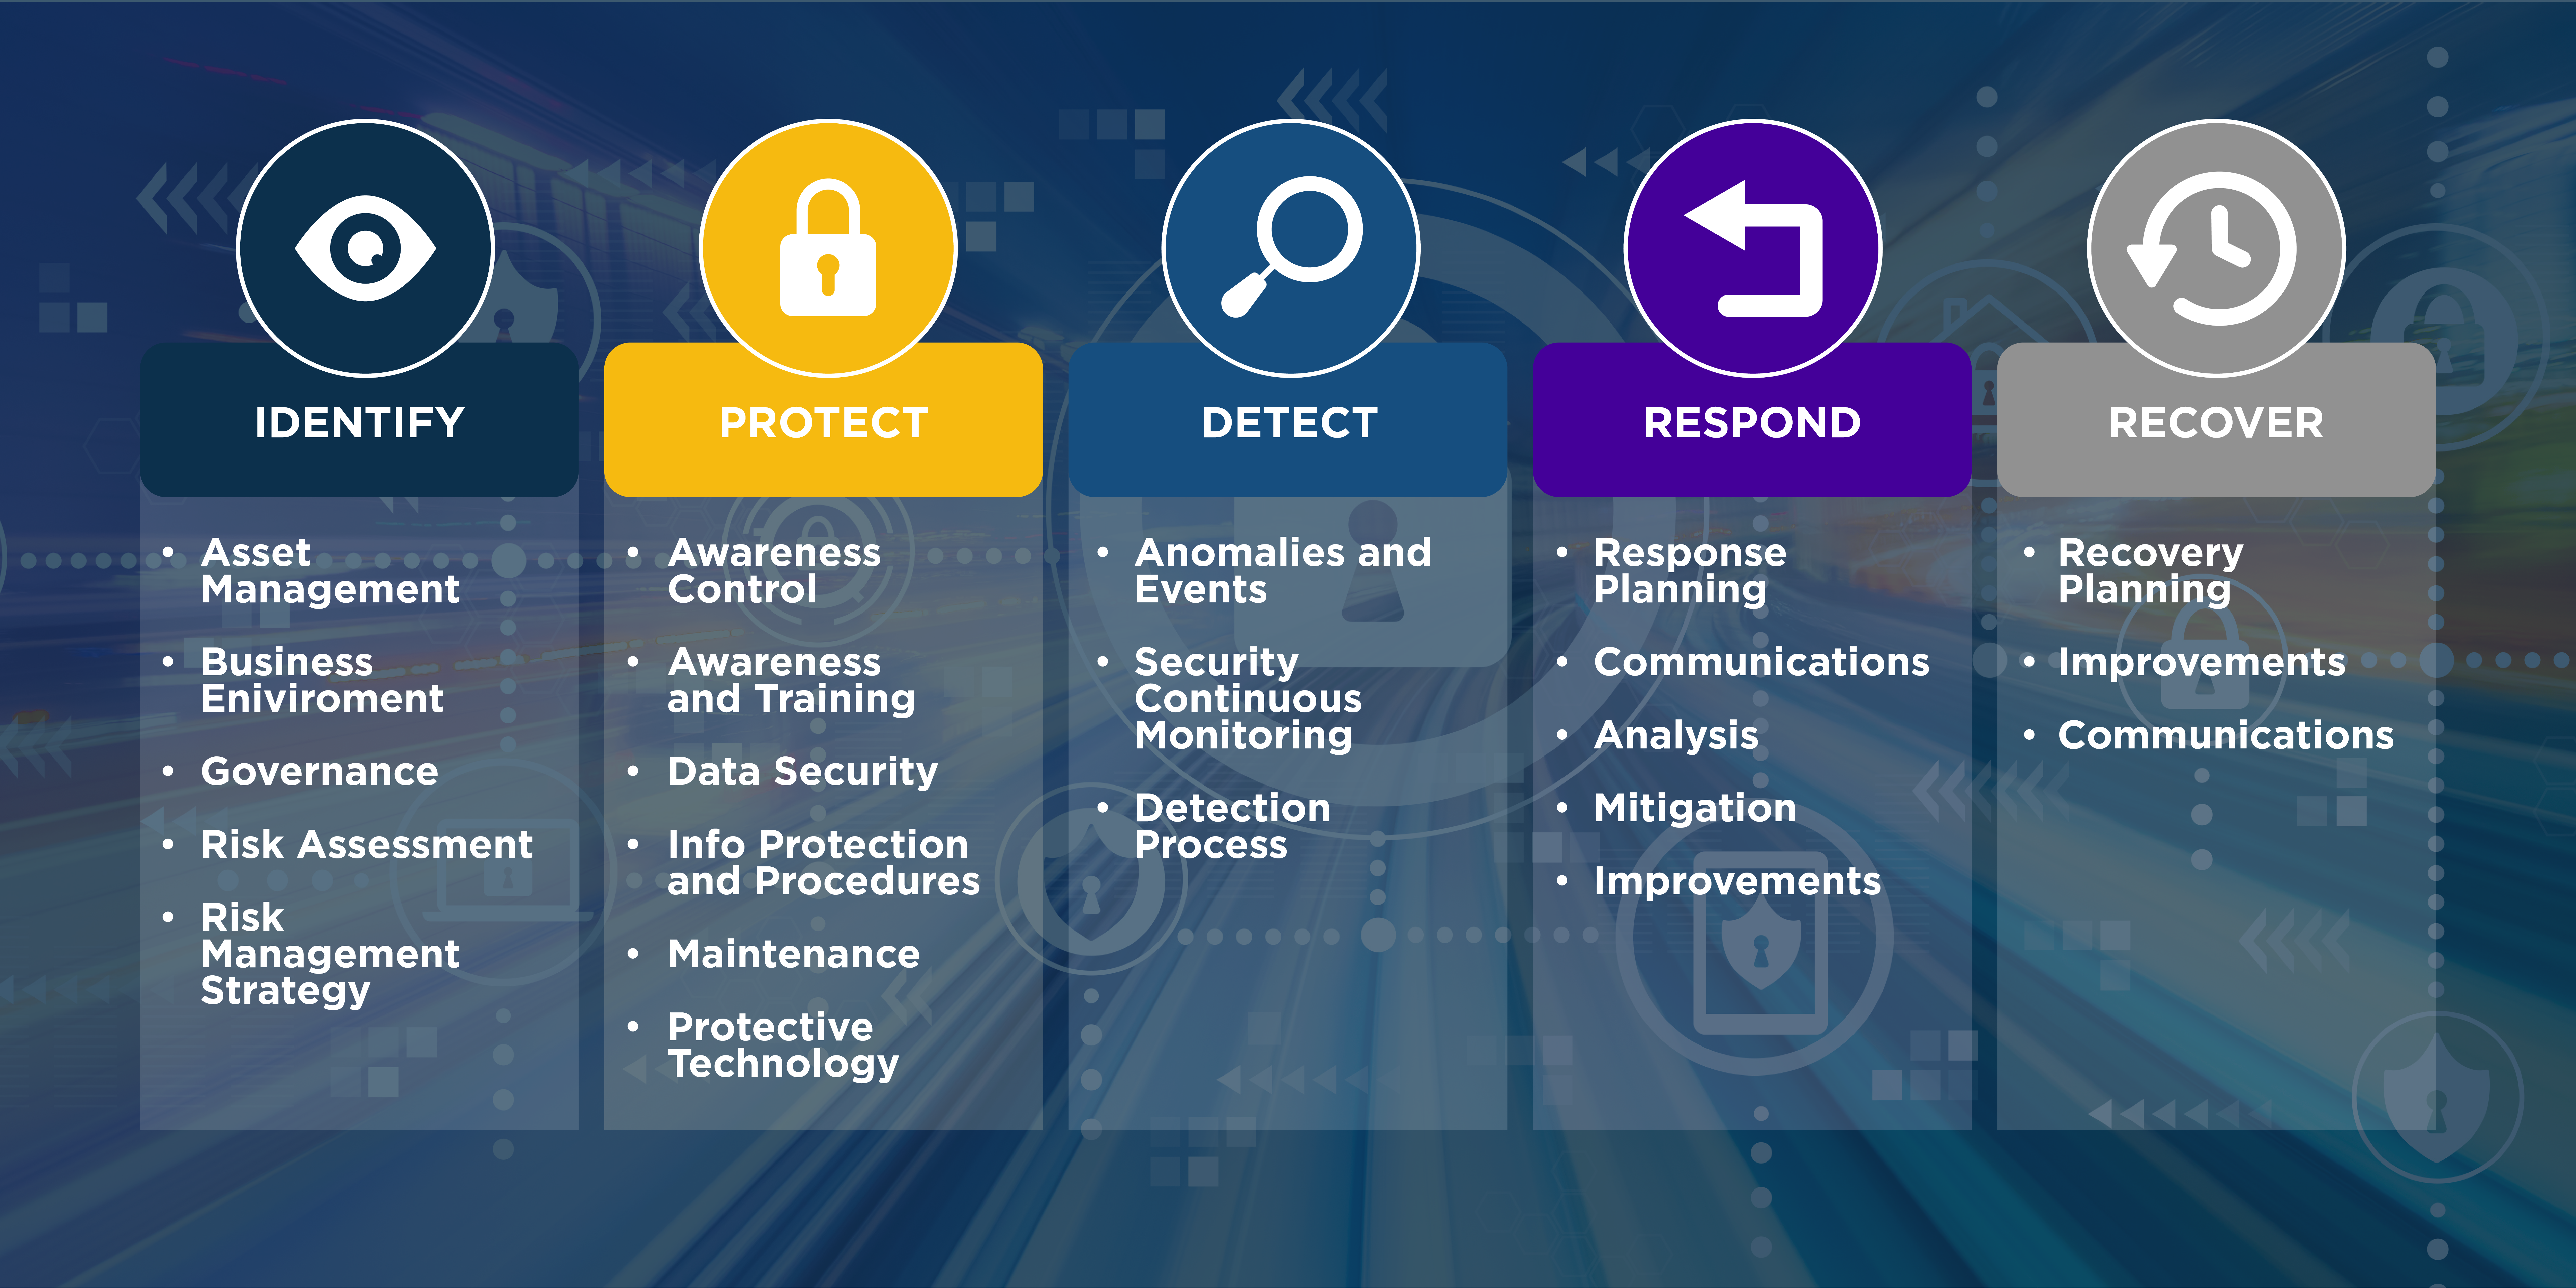 NIST Framework for Cybersecurity